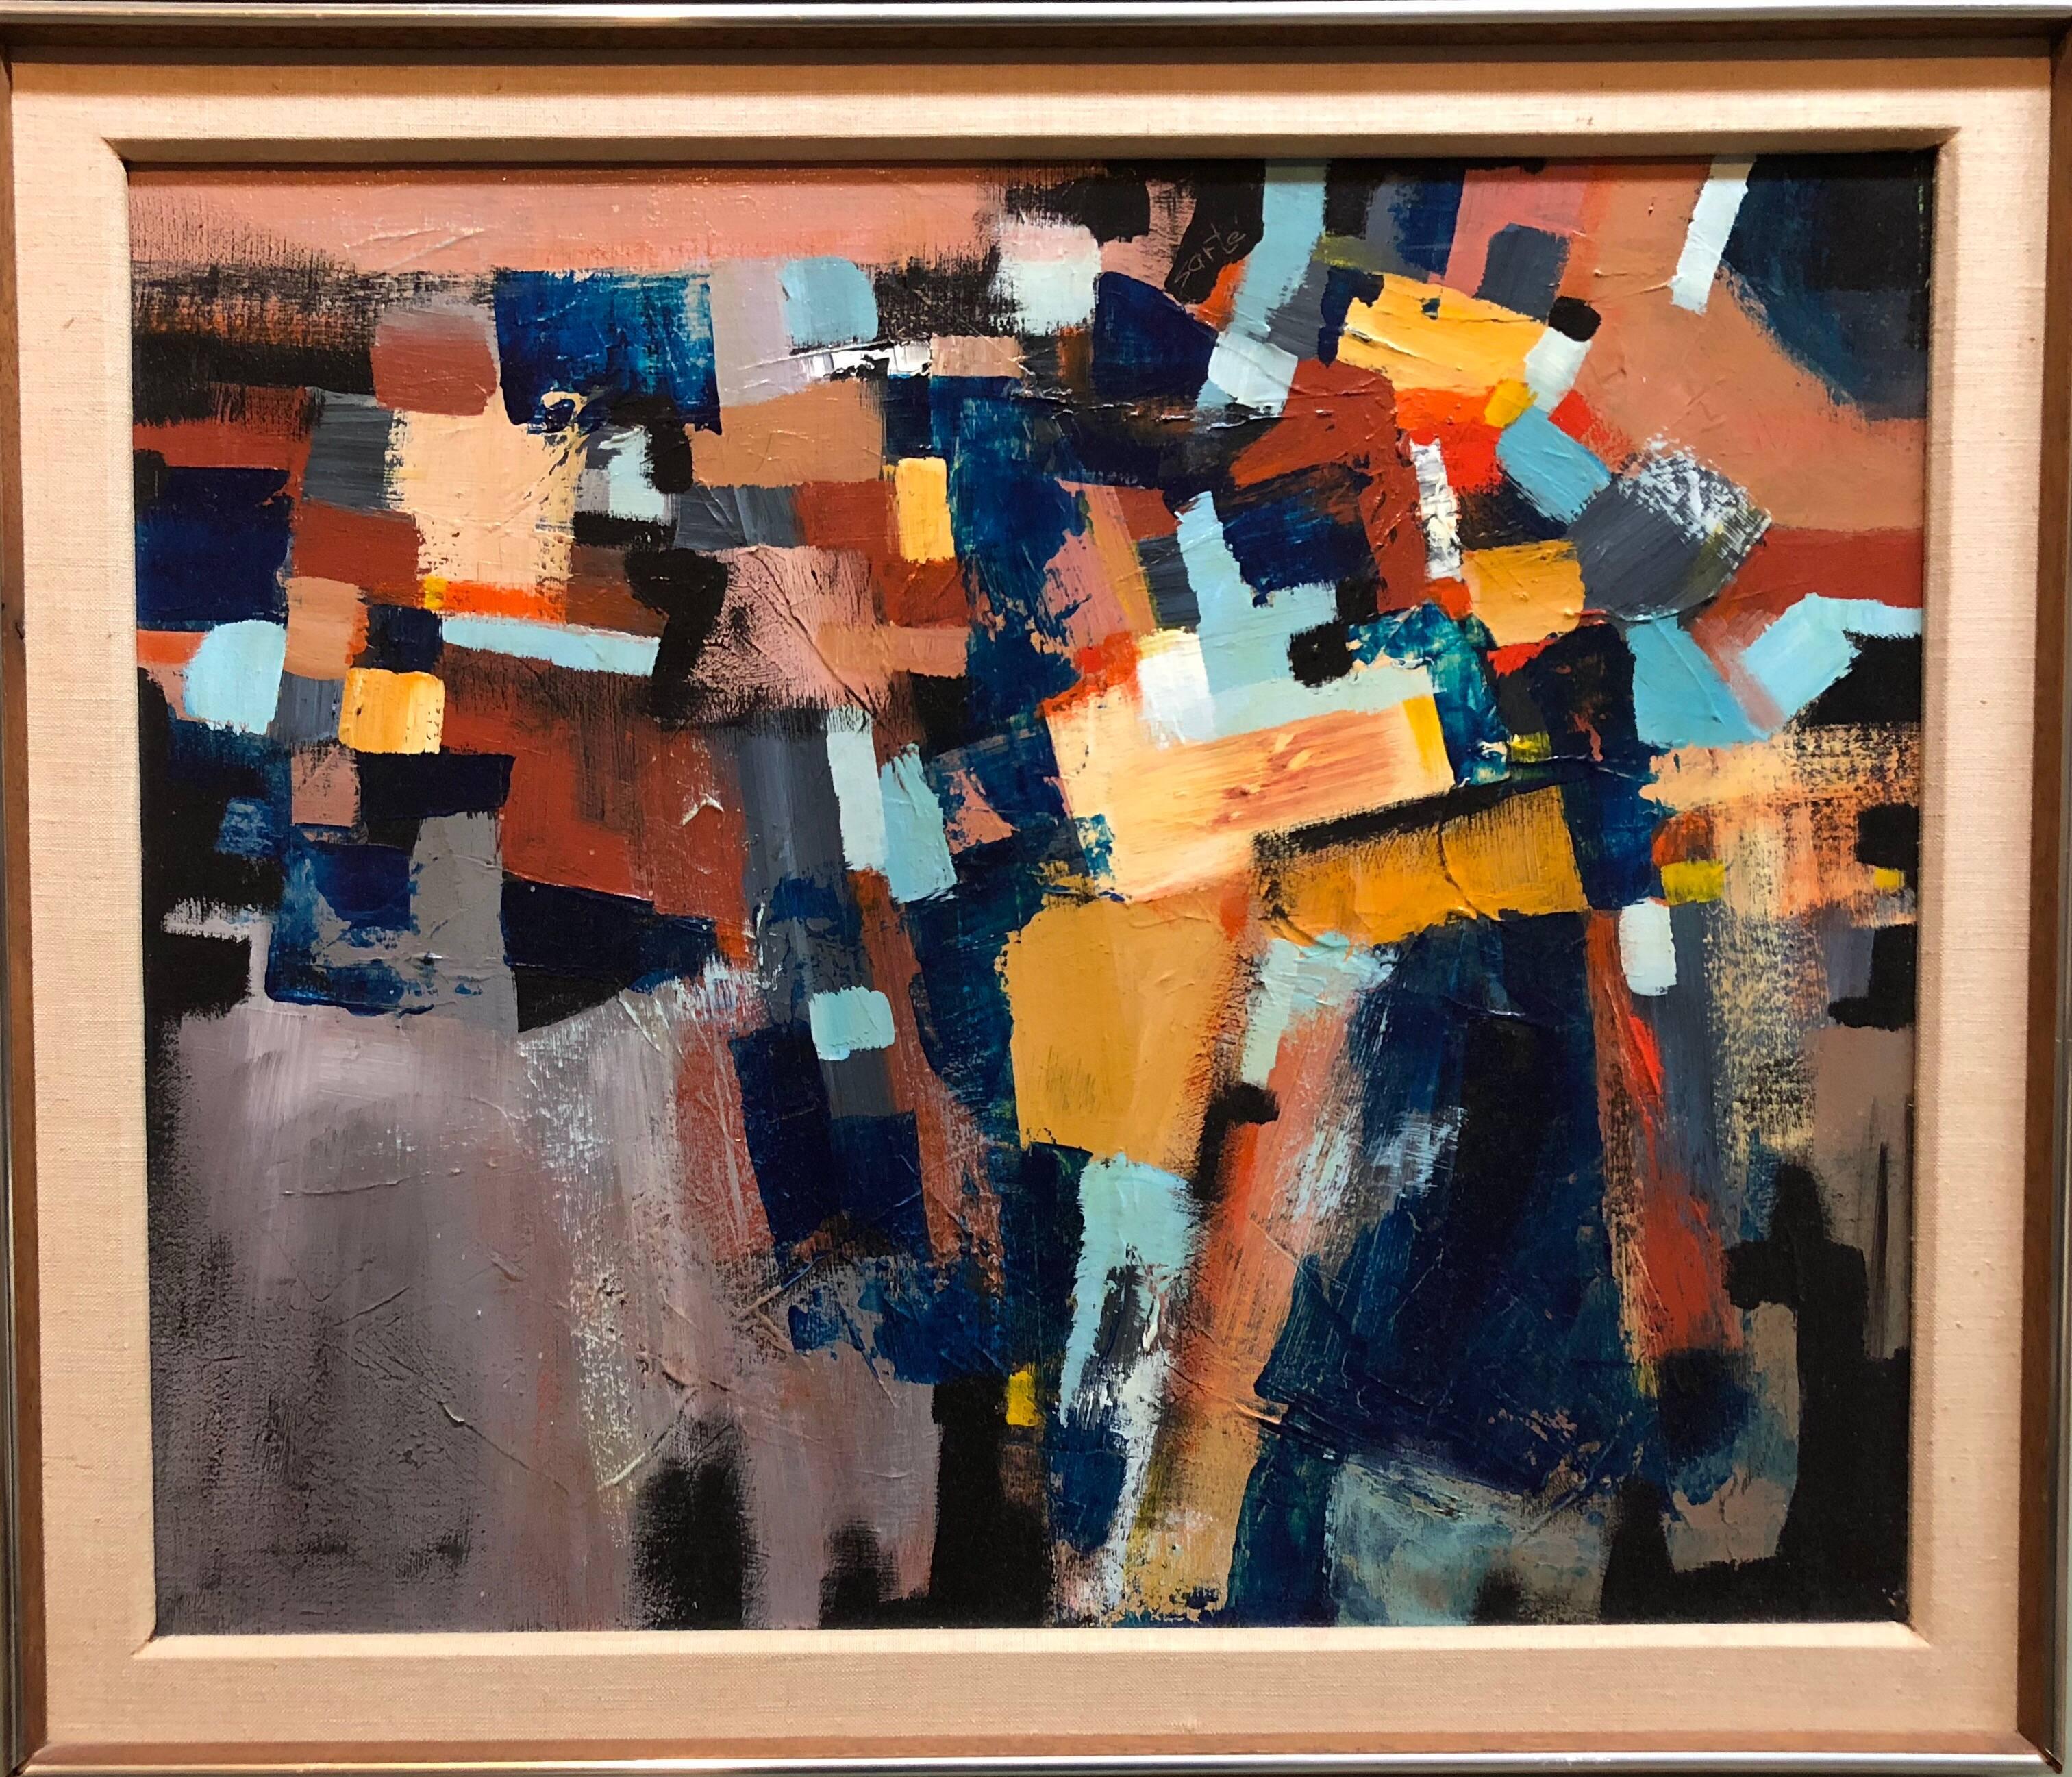 Inn the manner of the Hans Hofmann School. A great older Abstract Expressionist painting. 